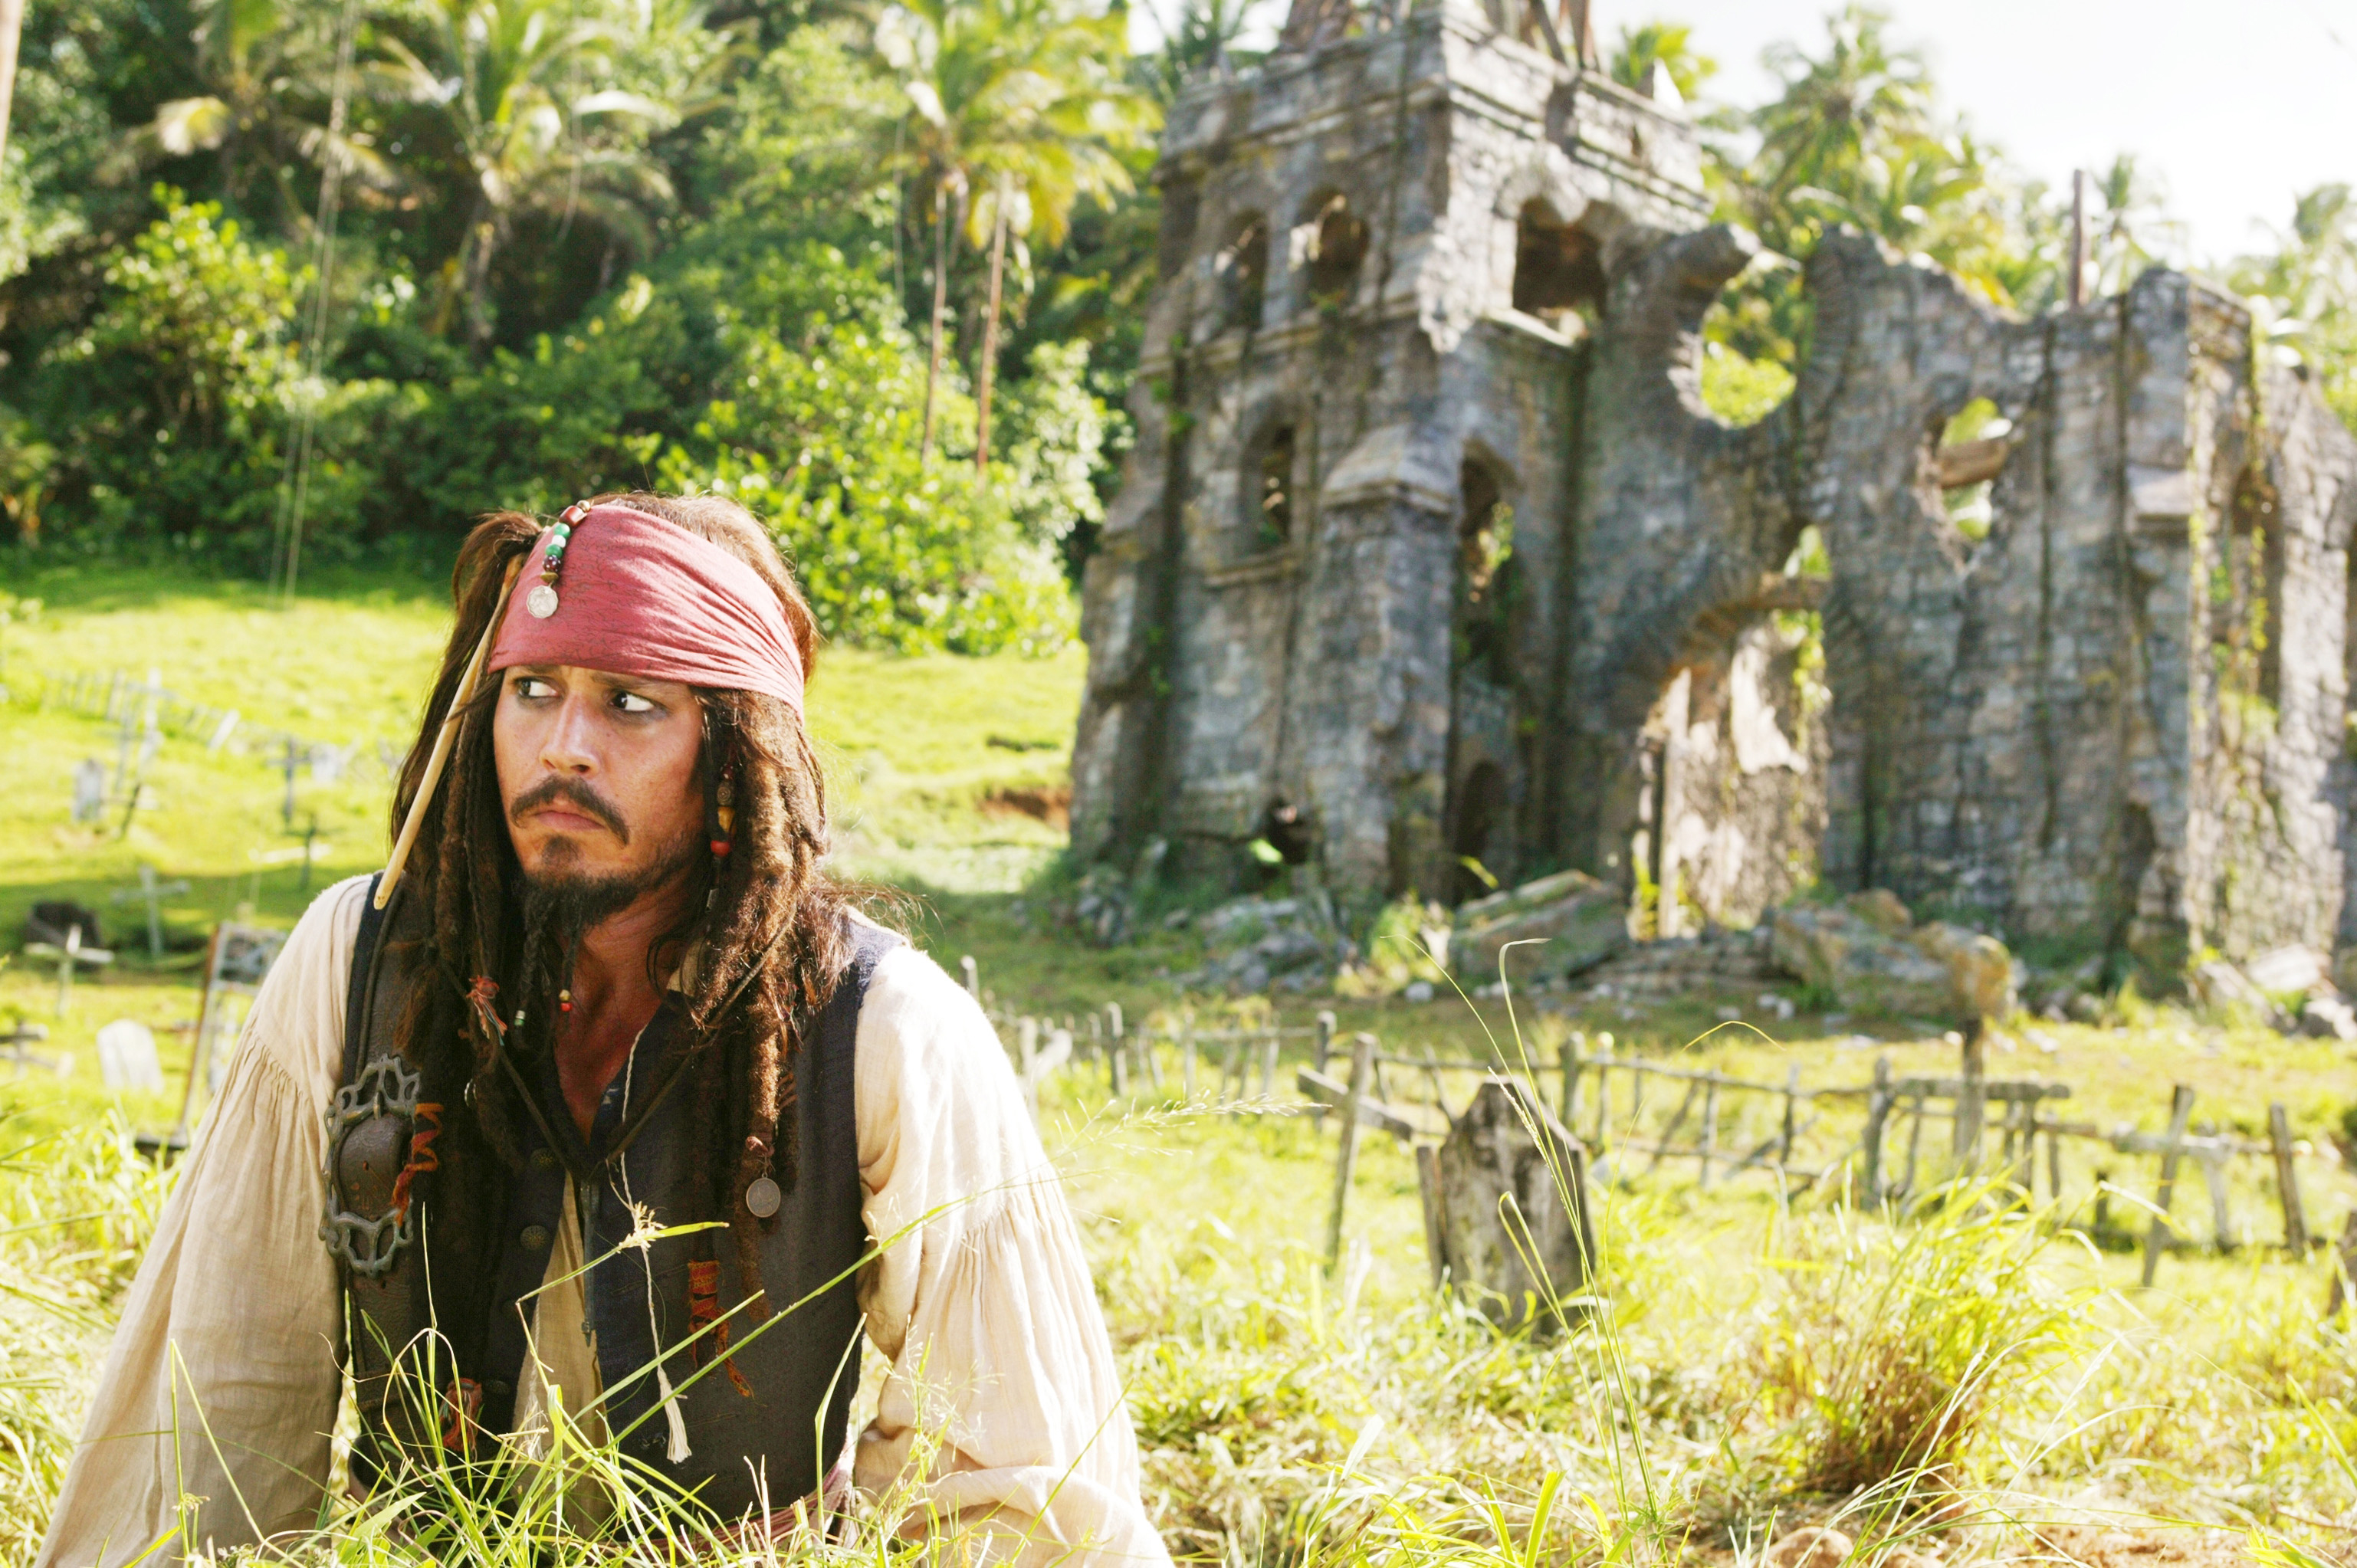 jack sparrow, movie, pirates of the caribbean: dead man's chest, johnny depp, pirates of the caribbean wallpaper for mobile